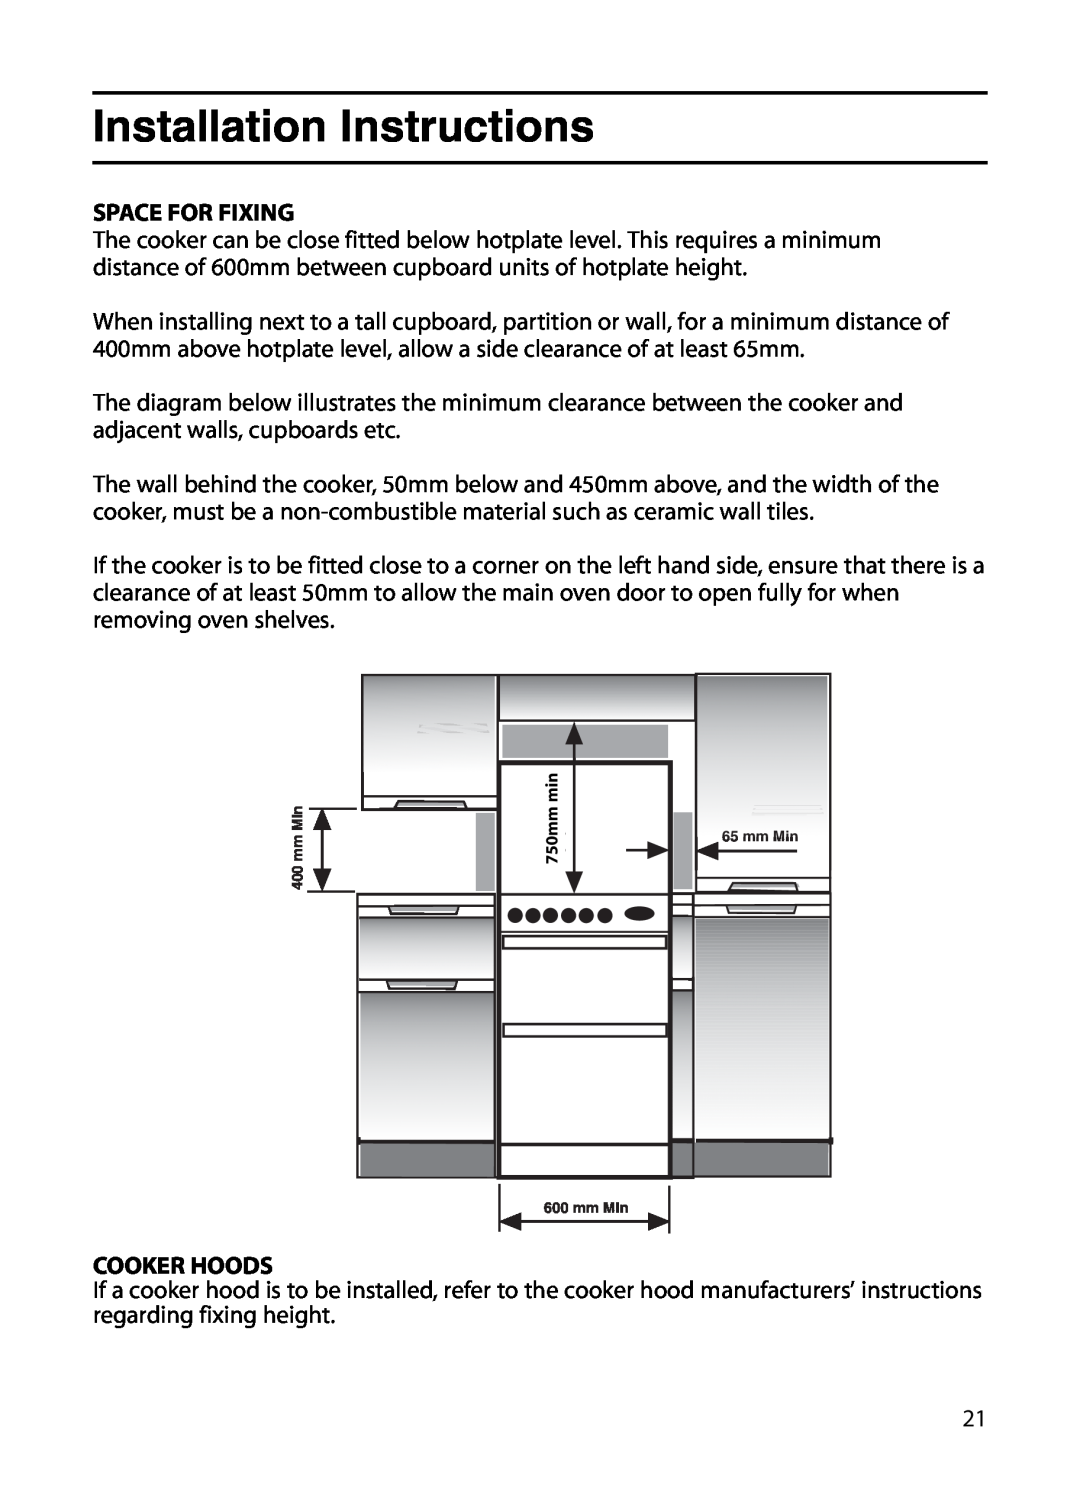 Indesit KT6G2MIR, KT6G2WIR manual Space For Fixing, Cooker Hoods, Installation Instructions, 750mm 